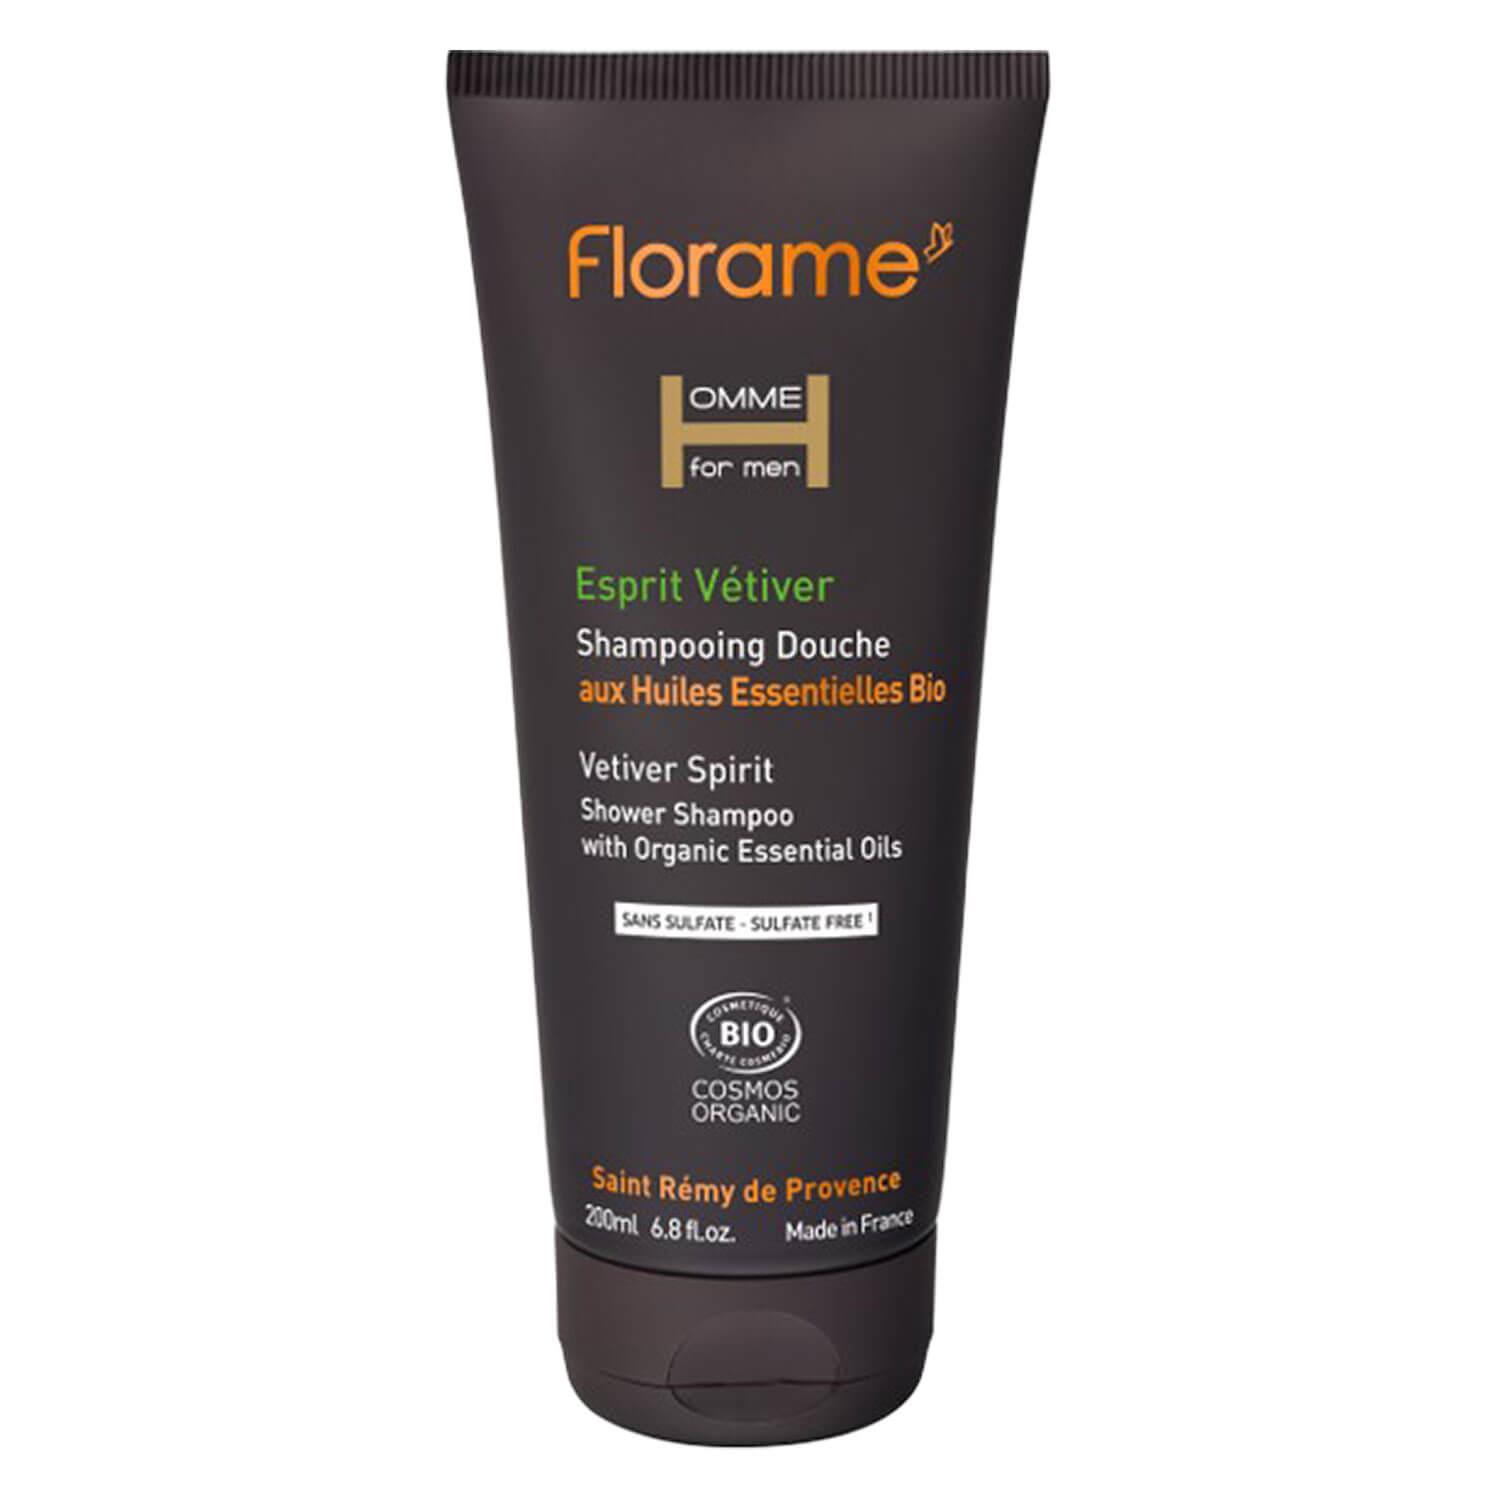 Florame Homme - Esprit Vetiver Shampooing Douche